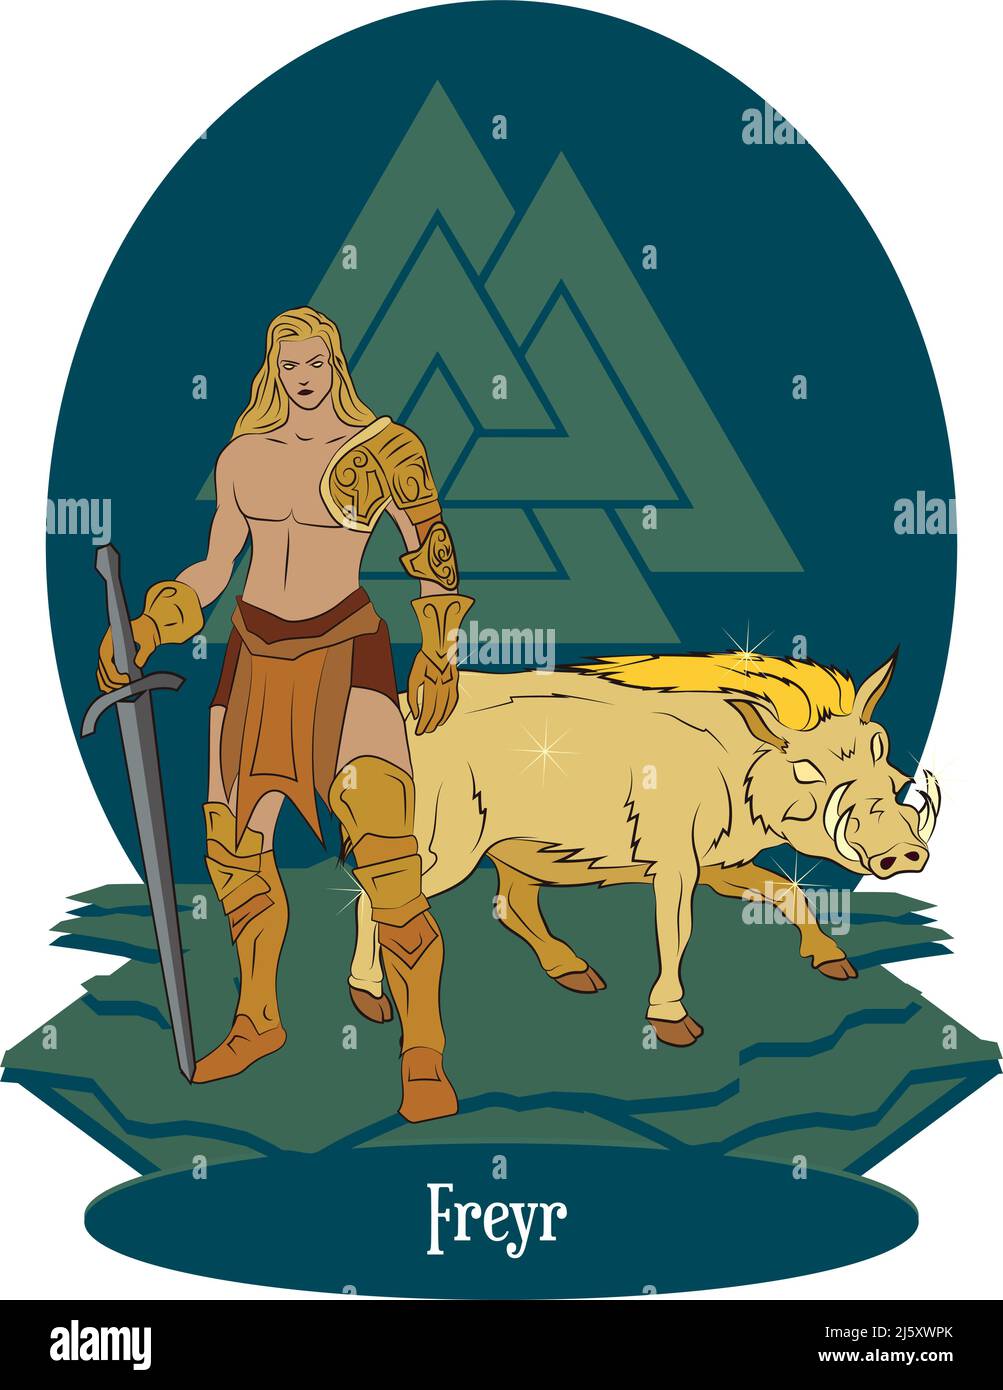 Illustration vector isolated of Norse or Scandinavian mythical god, Freyr Stock Vector